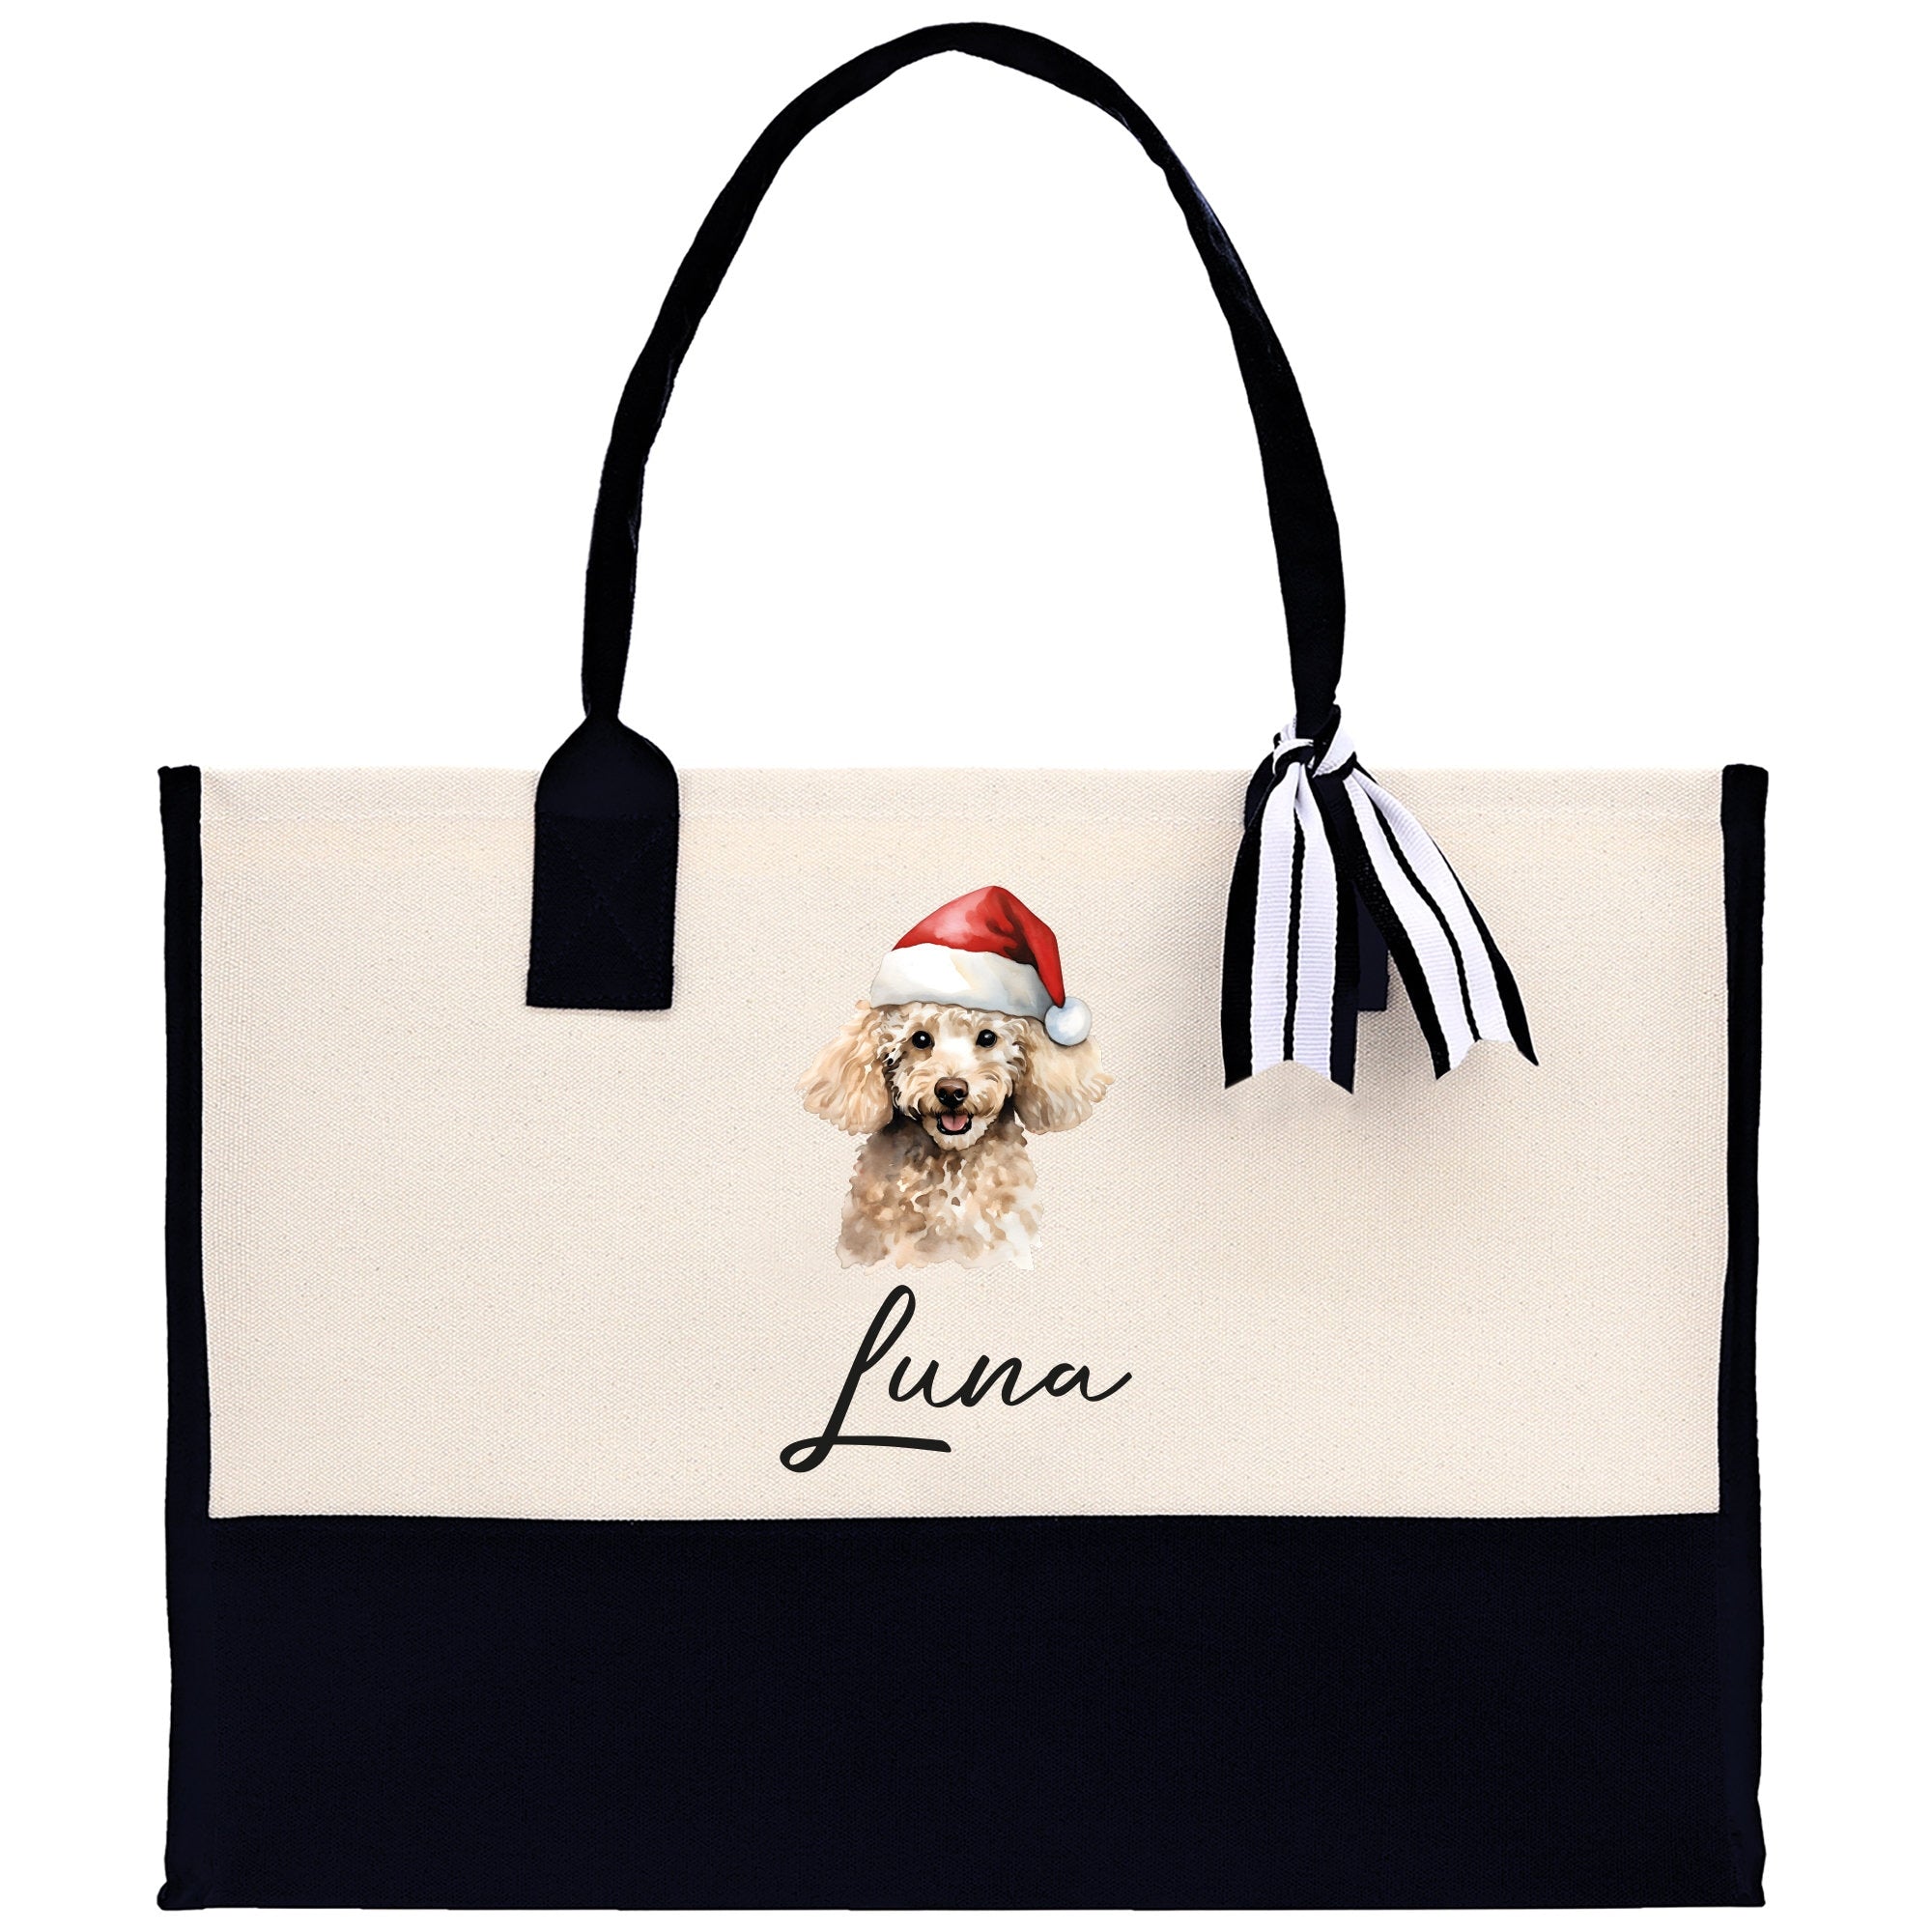 a black and white bag with a poodle wearing a santa hat